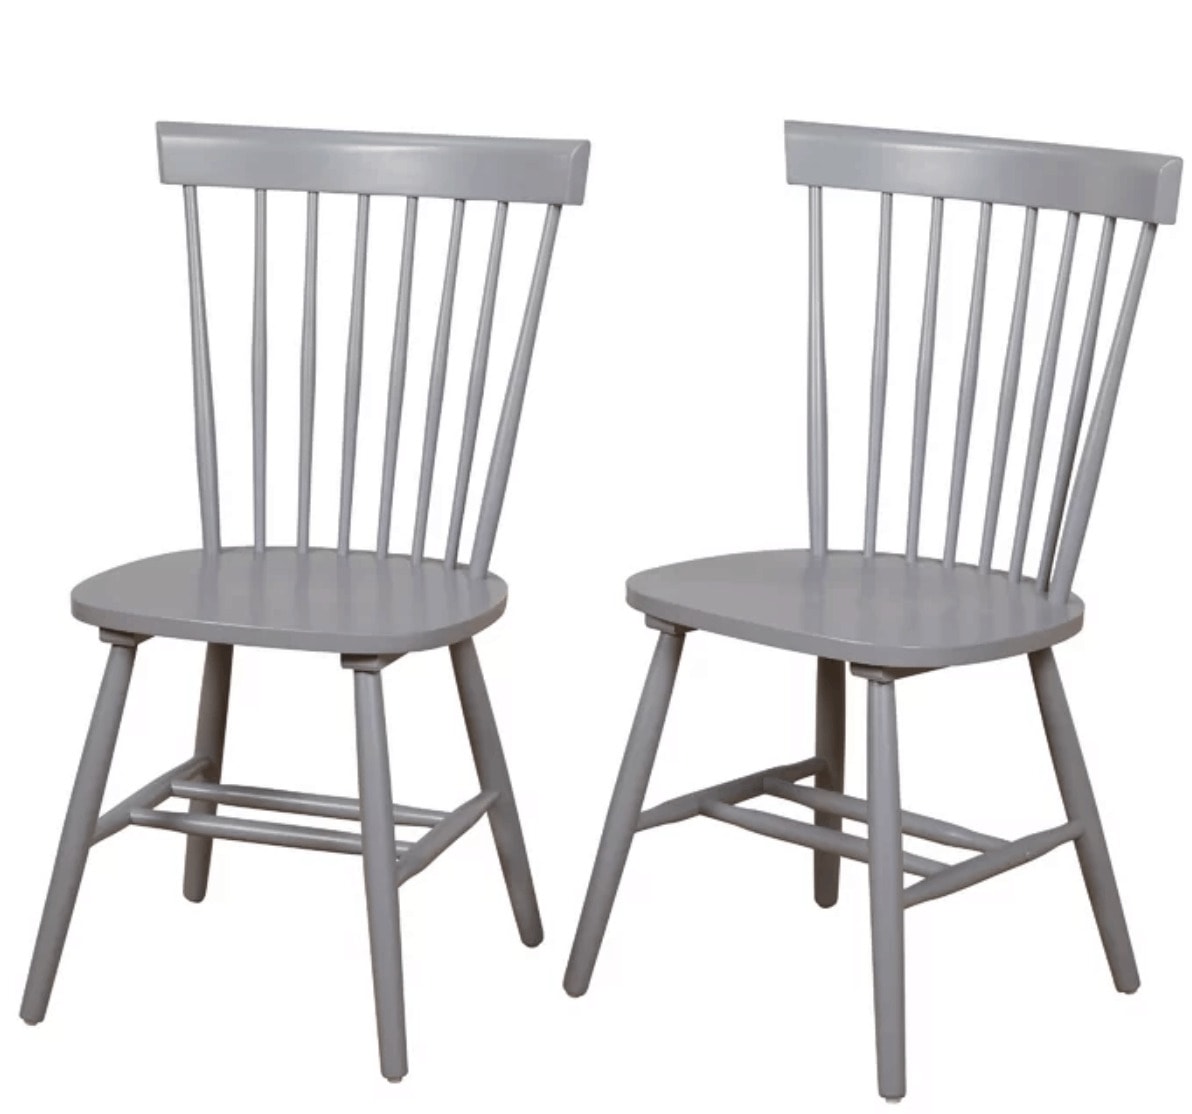 2 farmhouse-style wooden grey chairs 